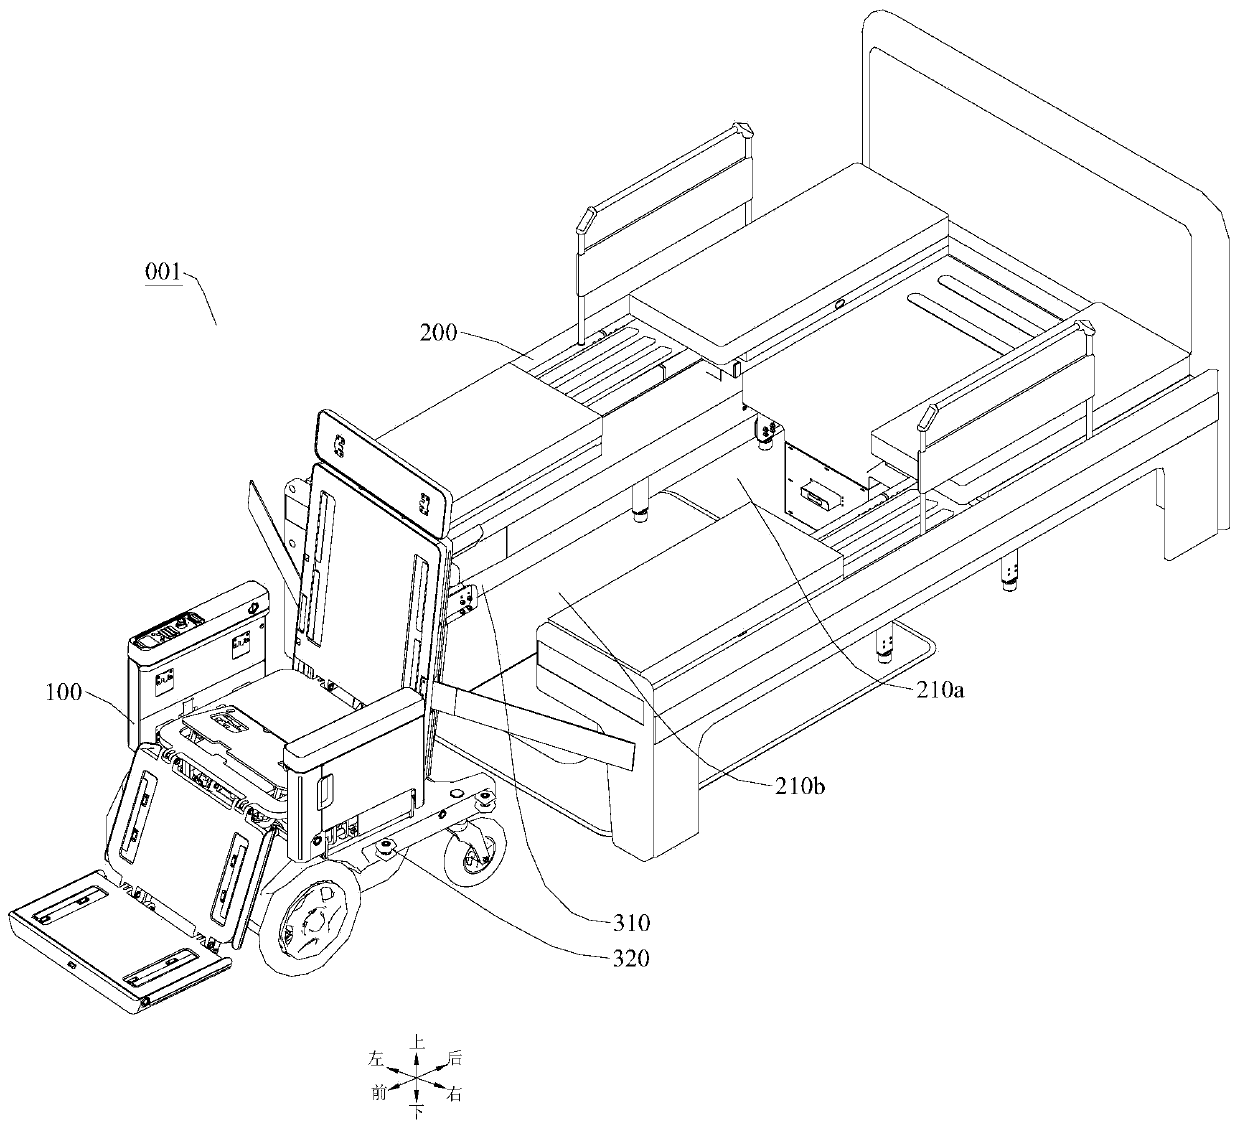 Wheelchair bed combining method and separating method